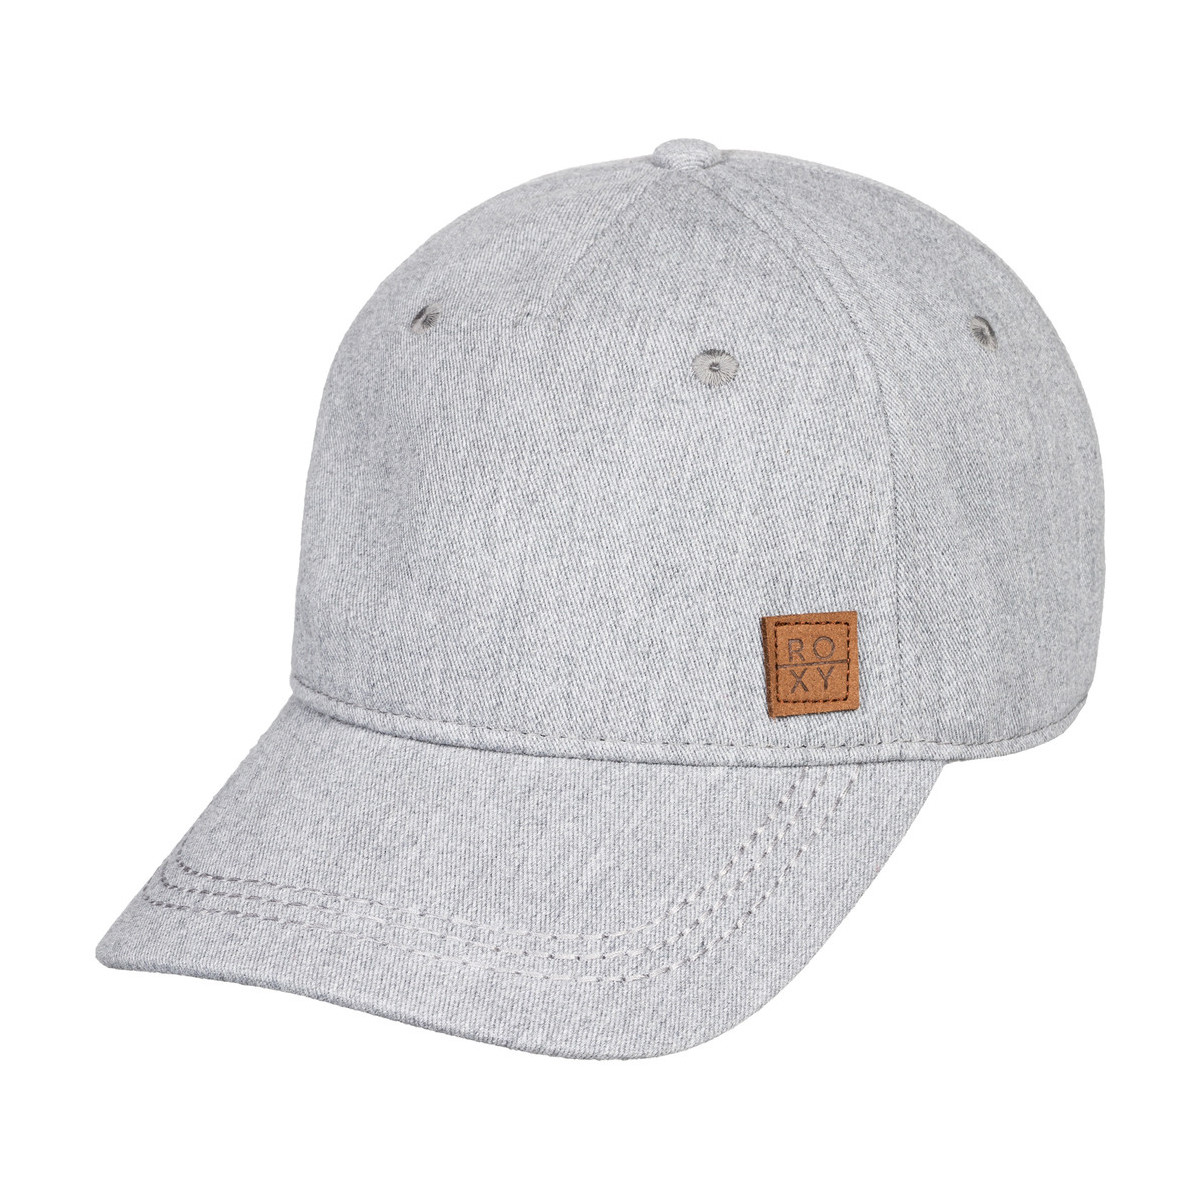 Accessoires textile Femme Casquettes Roxy Extra Innings Gris